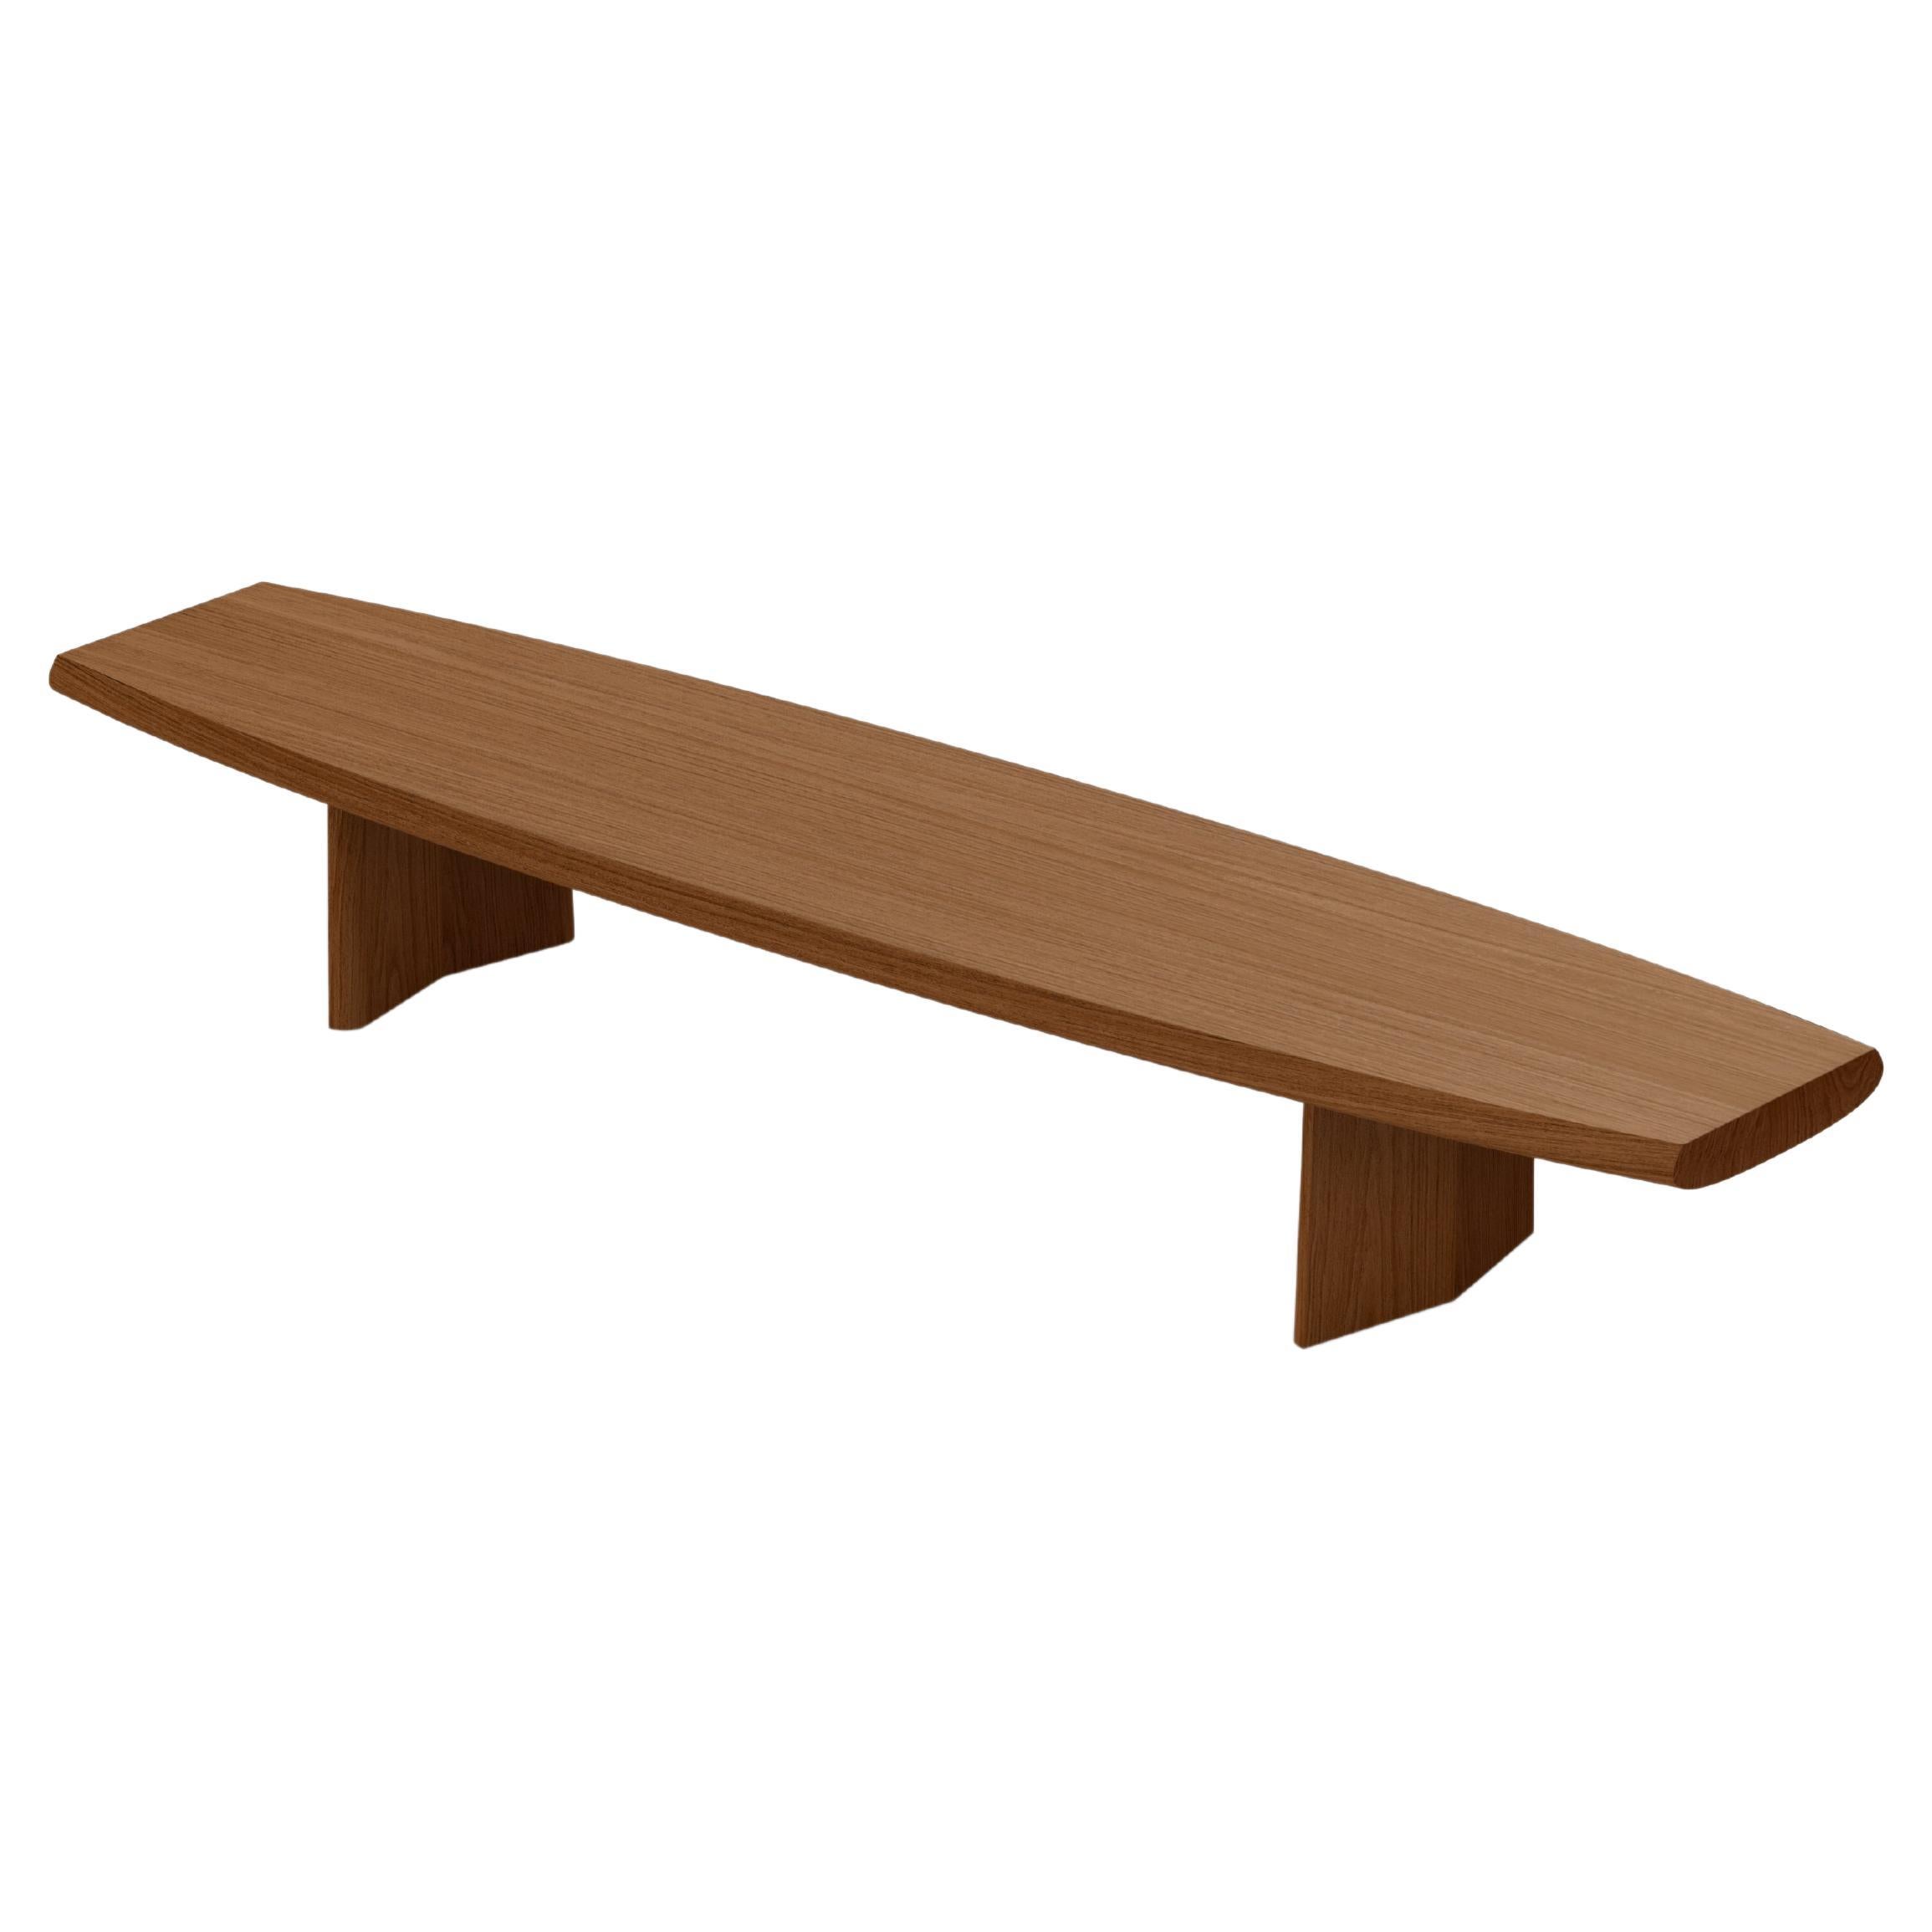 Peana Low Coffee Table, Bench in Red Tinted Wood Finish by Joel Escalona